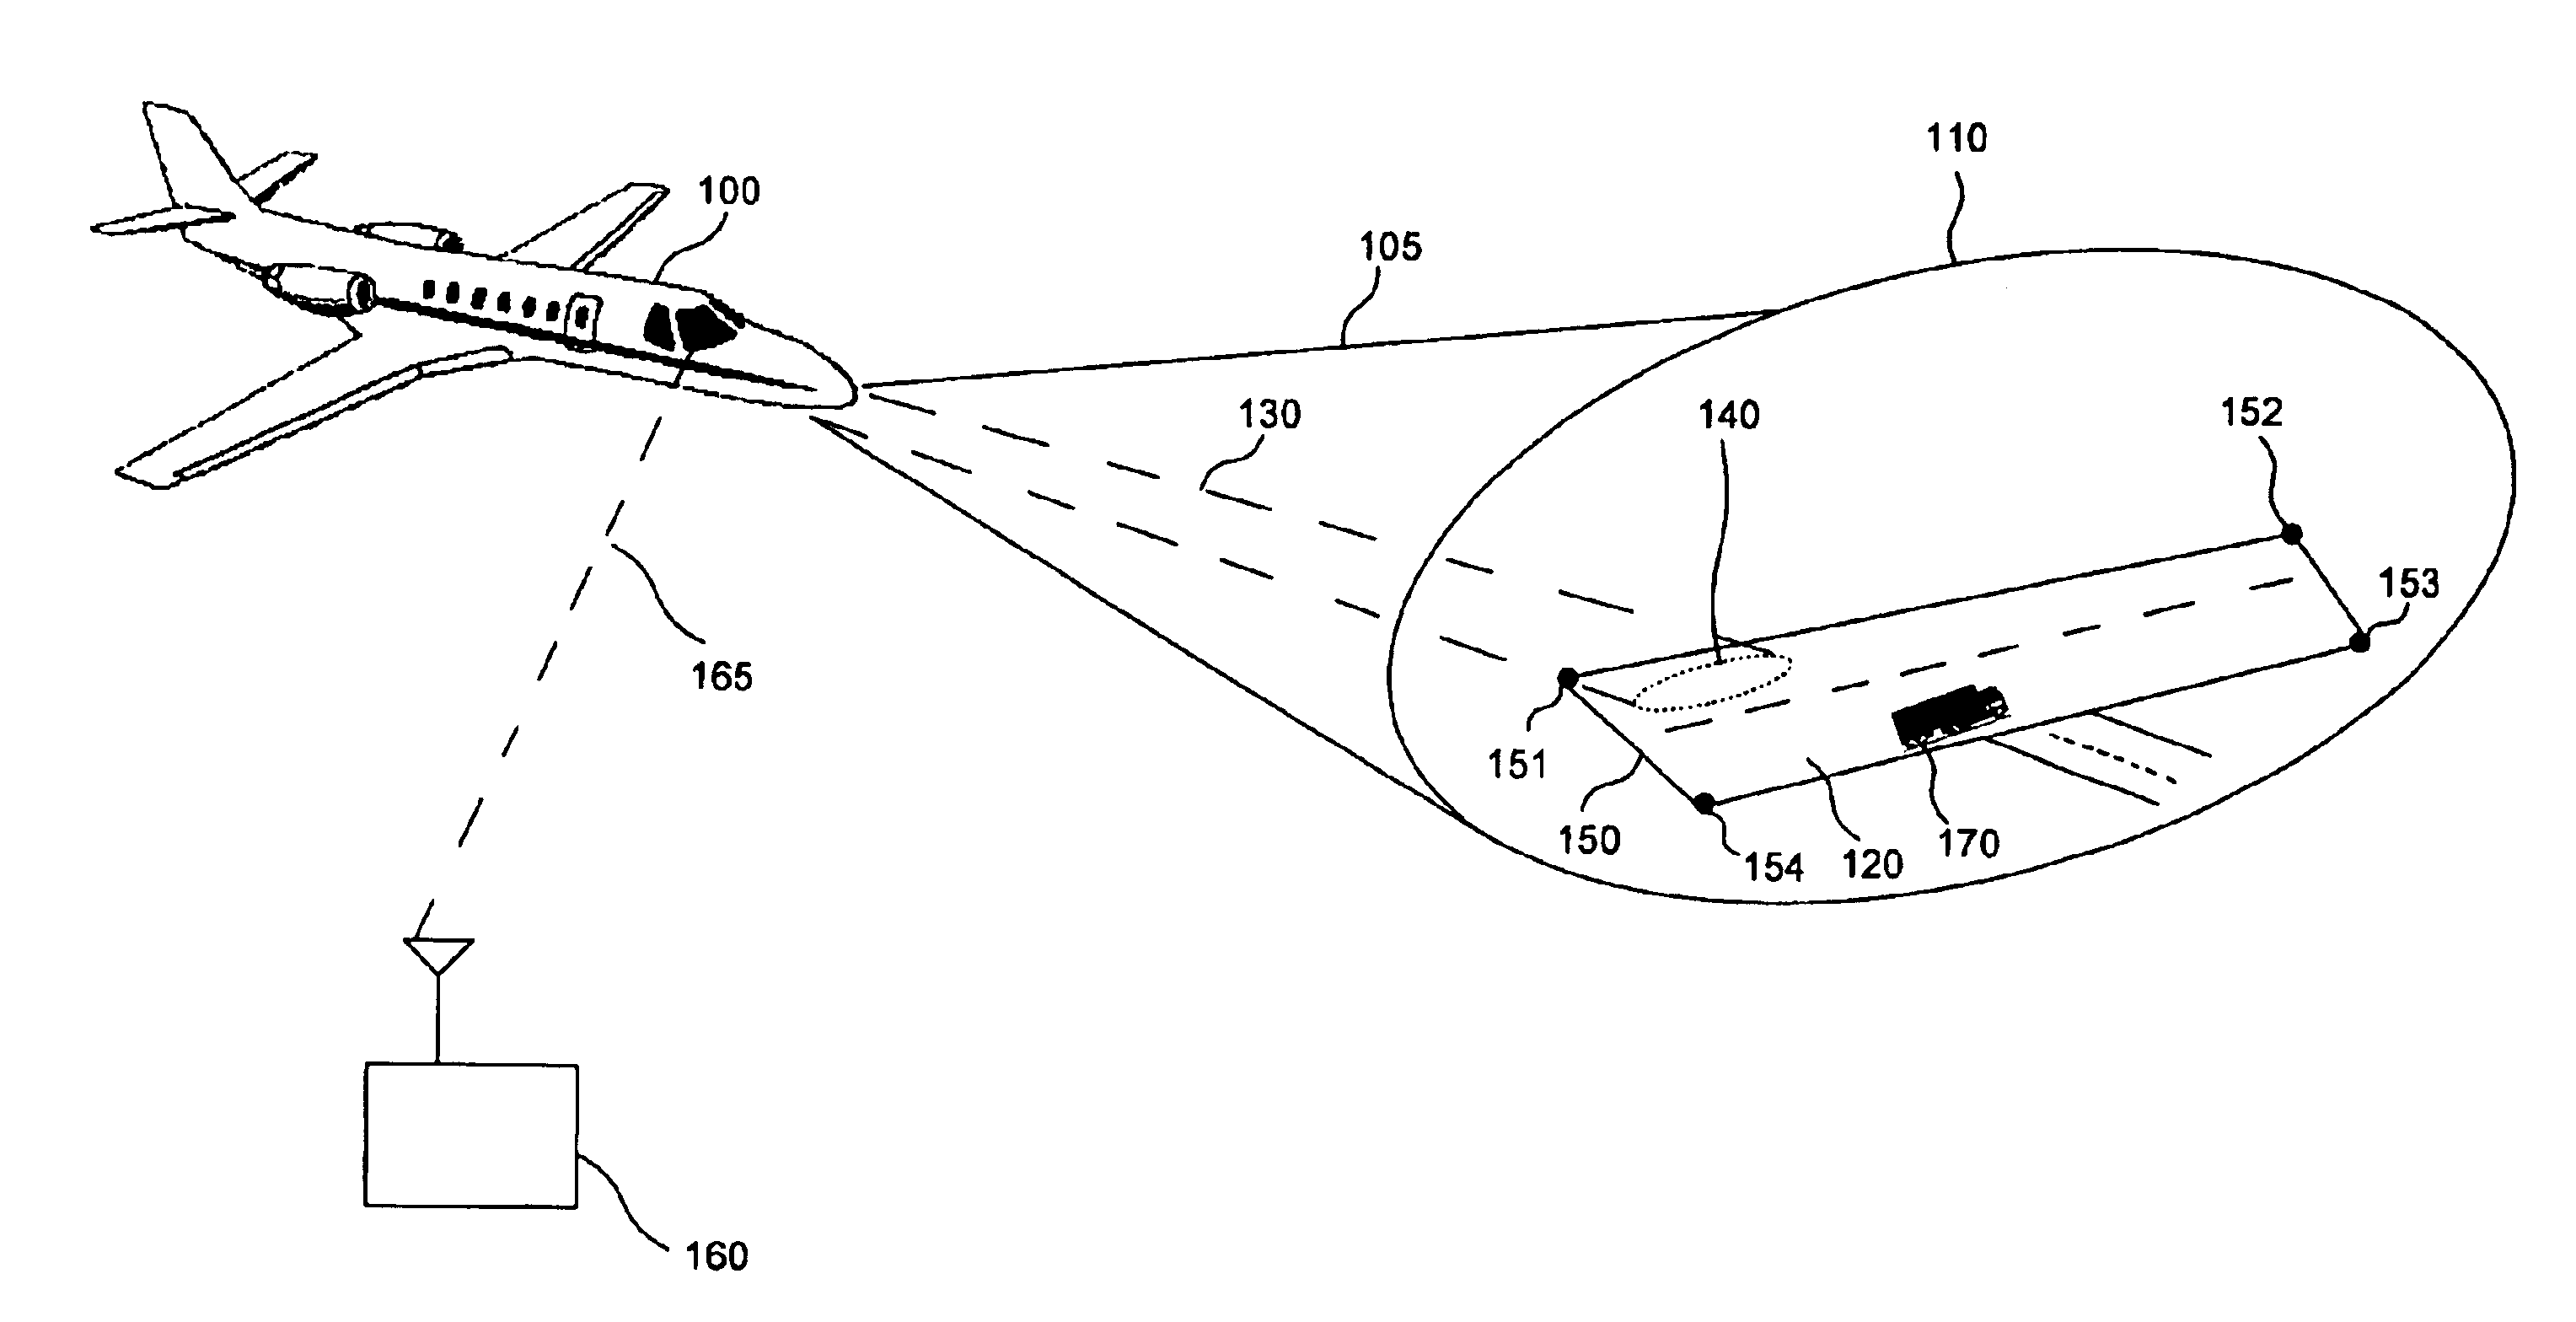 Runway obstacle detection system and method